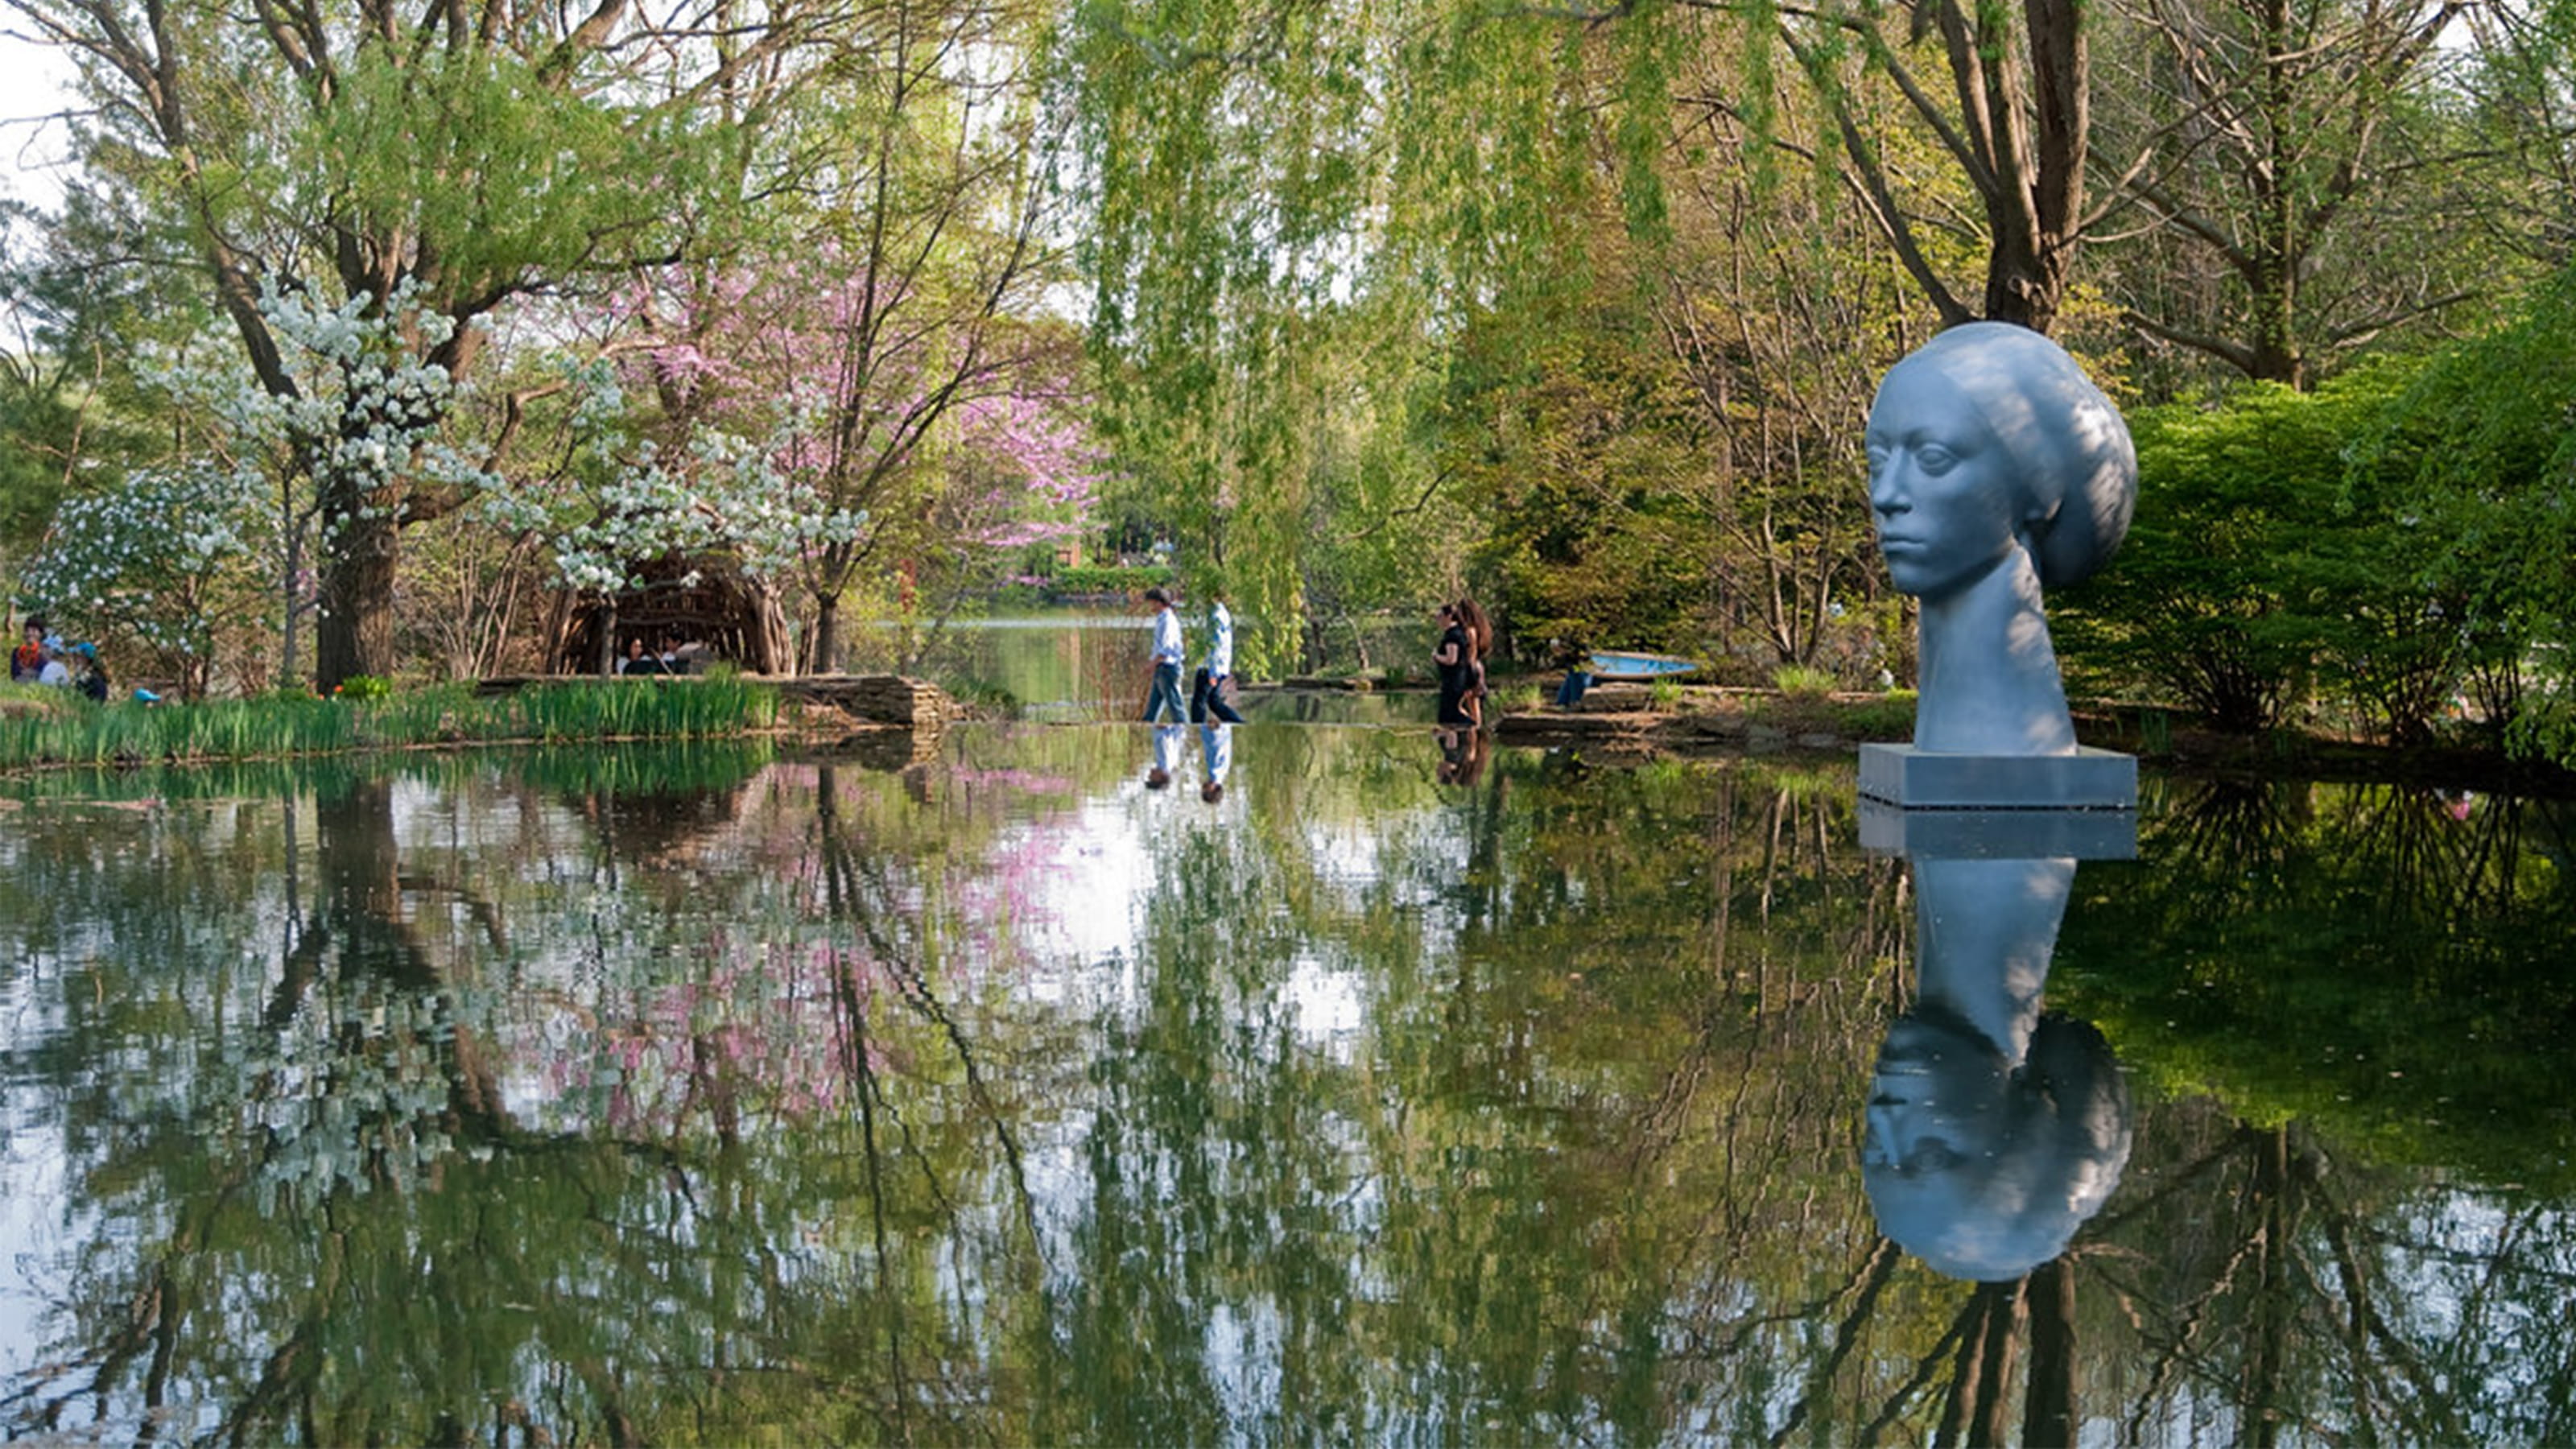 Bust of woman's head in water at Grounds for Sculpture